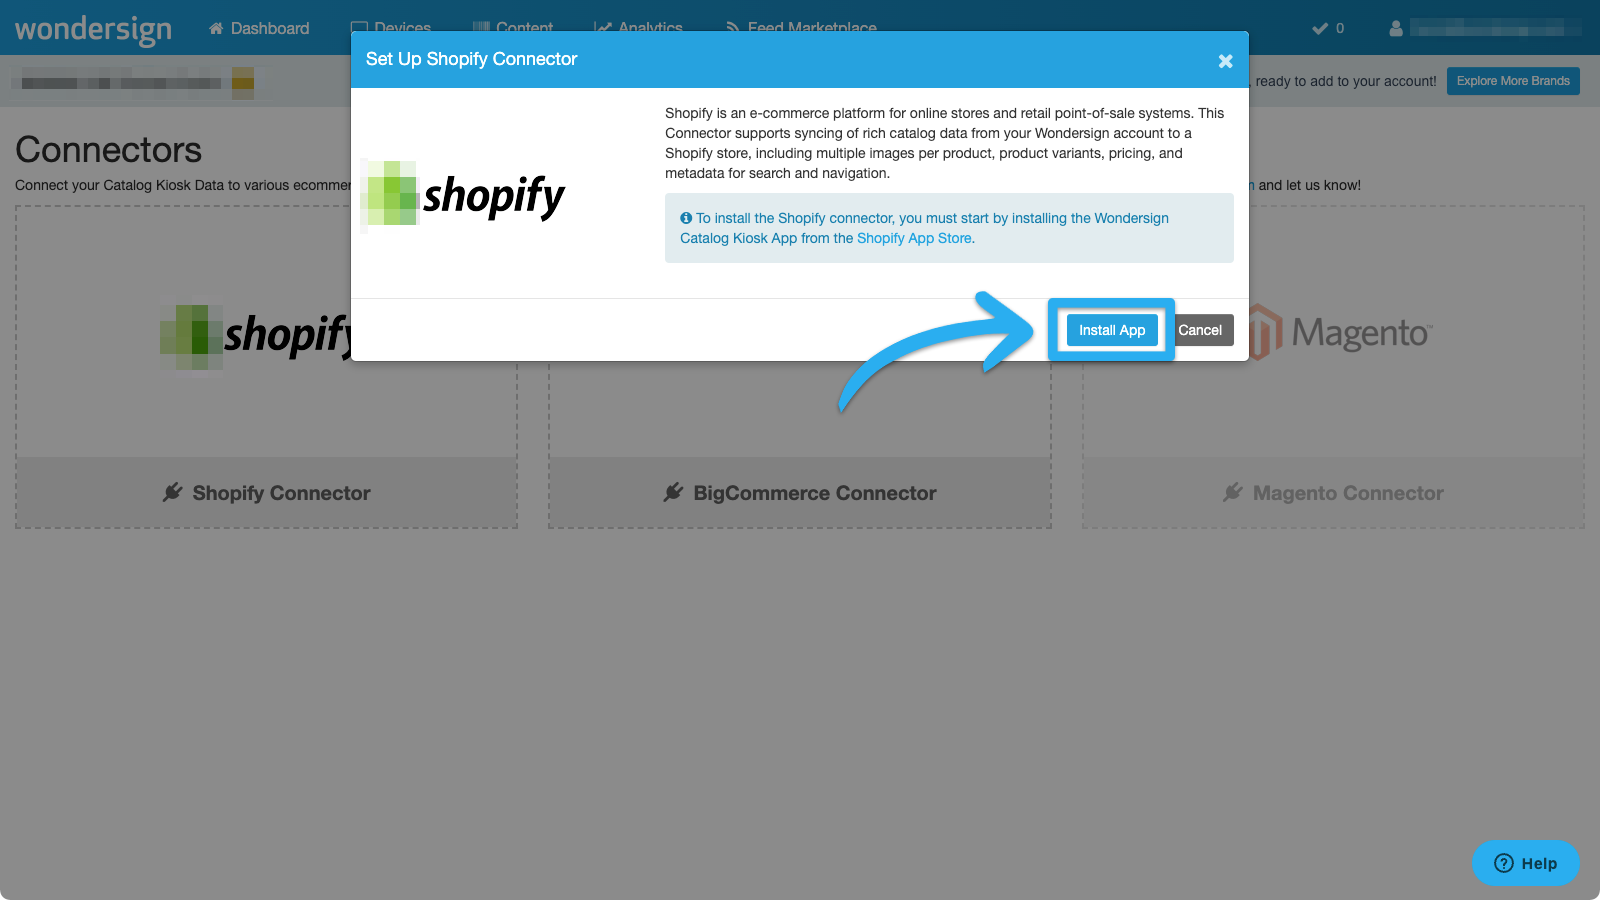 Install the Shopify Connector